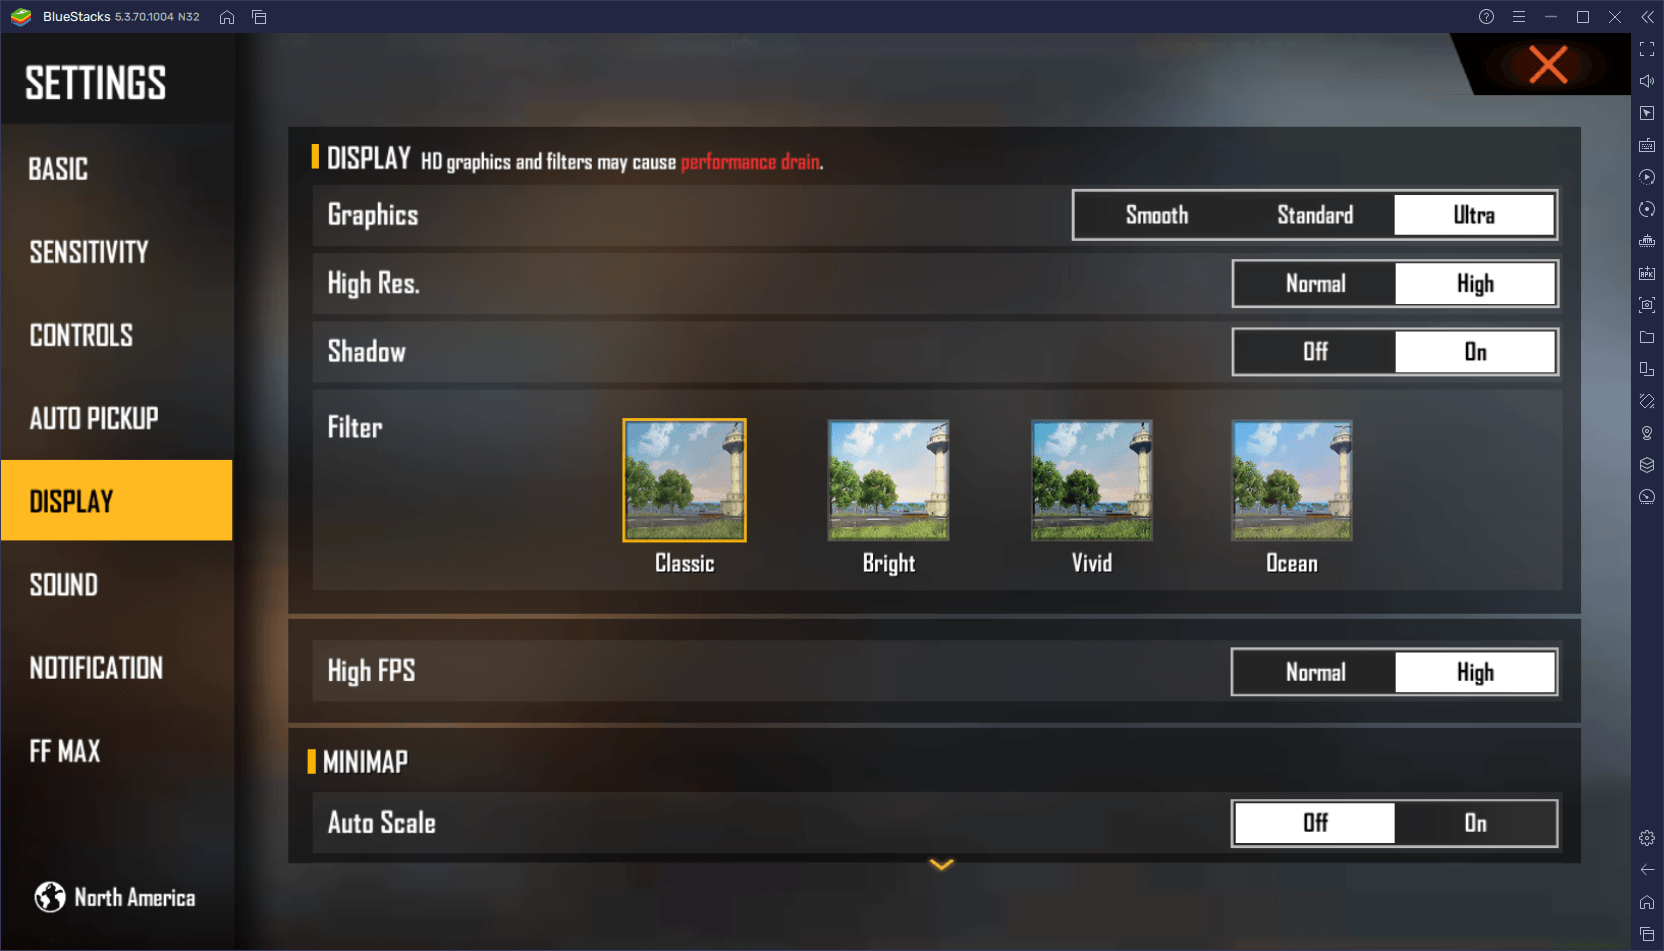 Free Fire MAX on PC - Use BlueStacks to get the Headshots and Booyahs